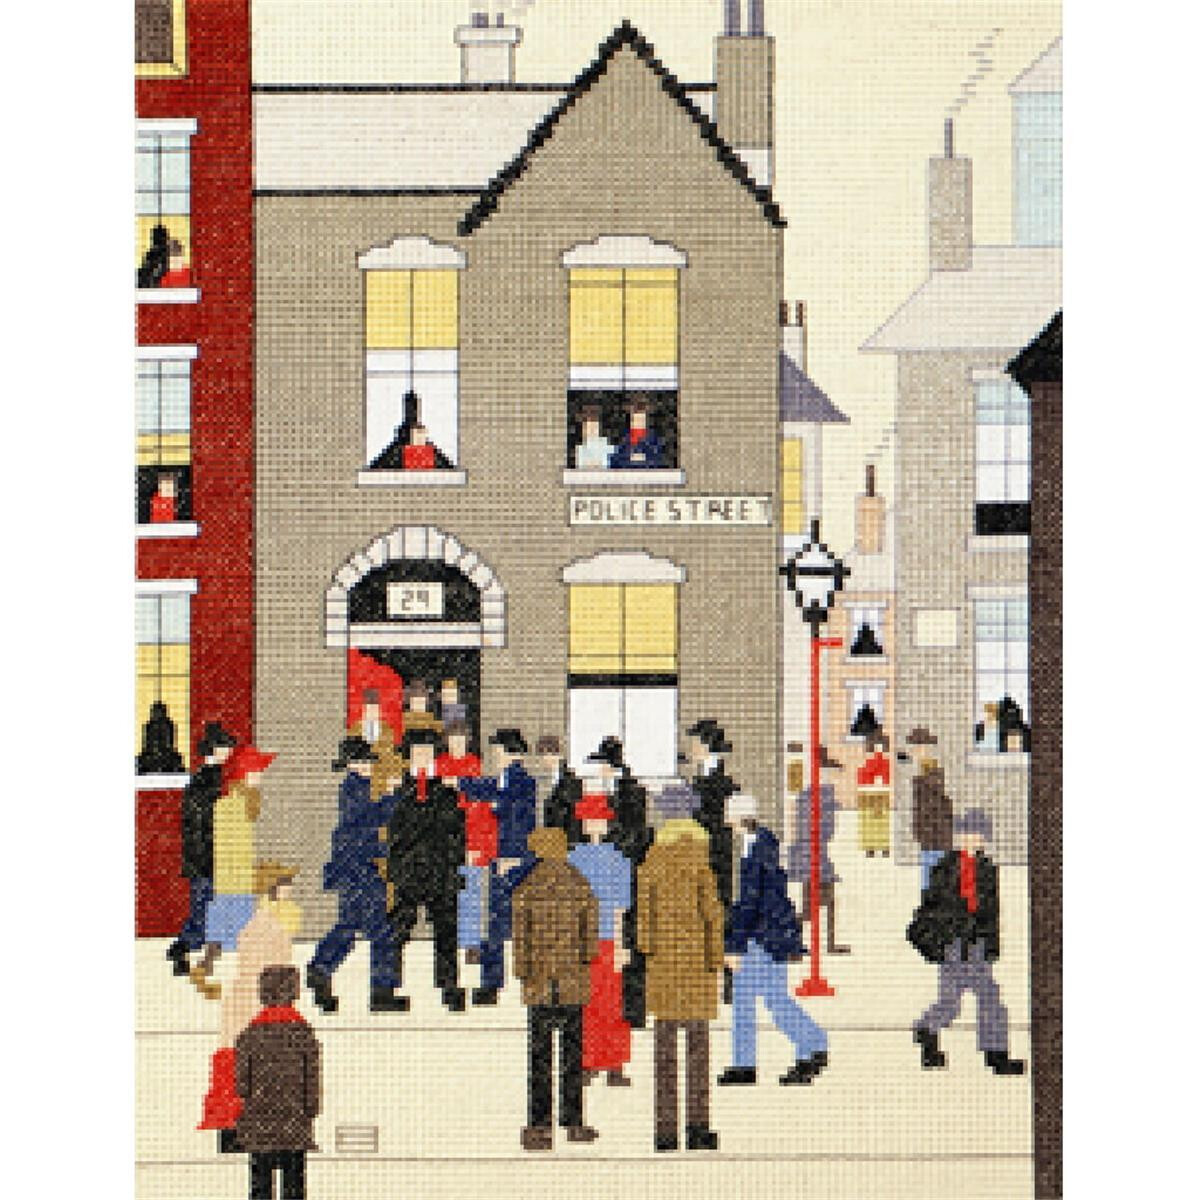 An embroidery shows a busy street scene. In the center is...